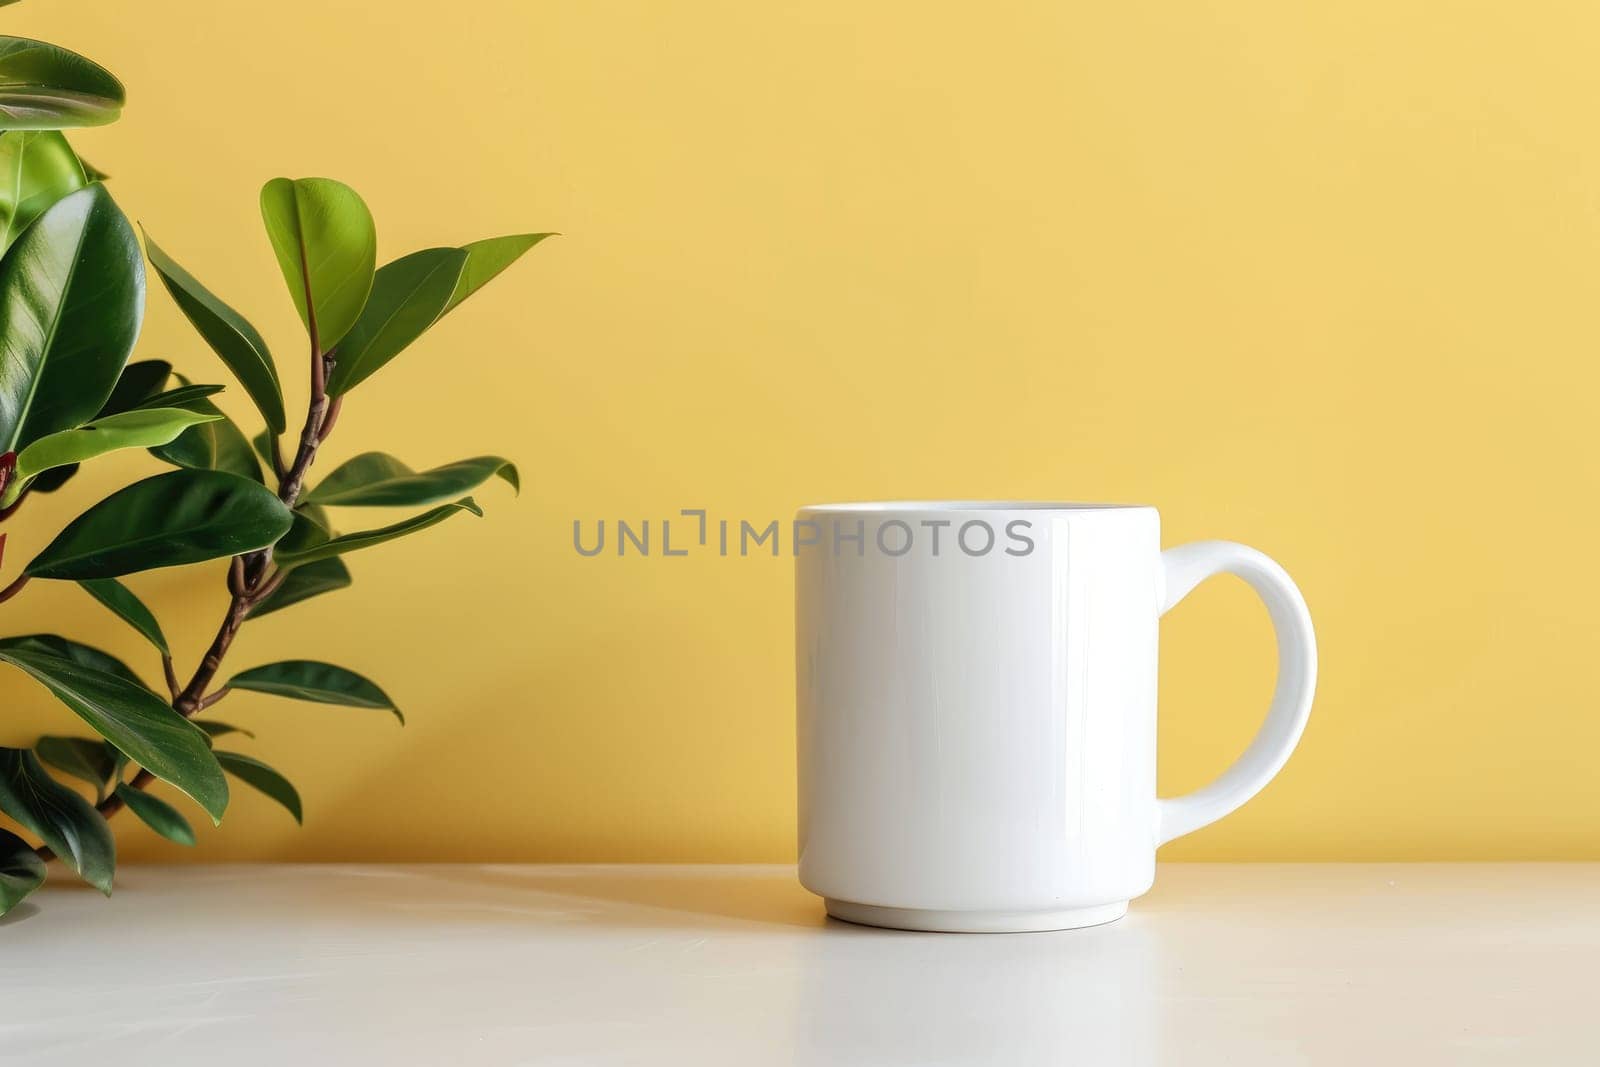 A white mug mock up blank template for your design advertising logo, White mug mock up in minimalist style by nijieimu